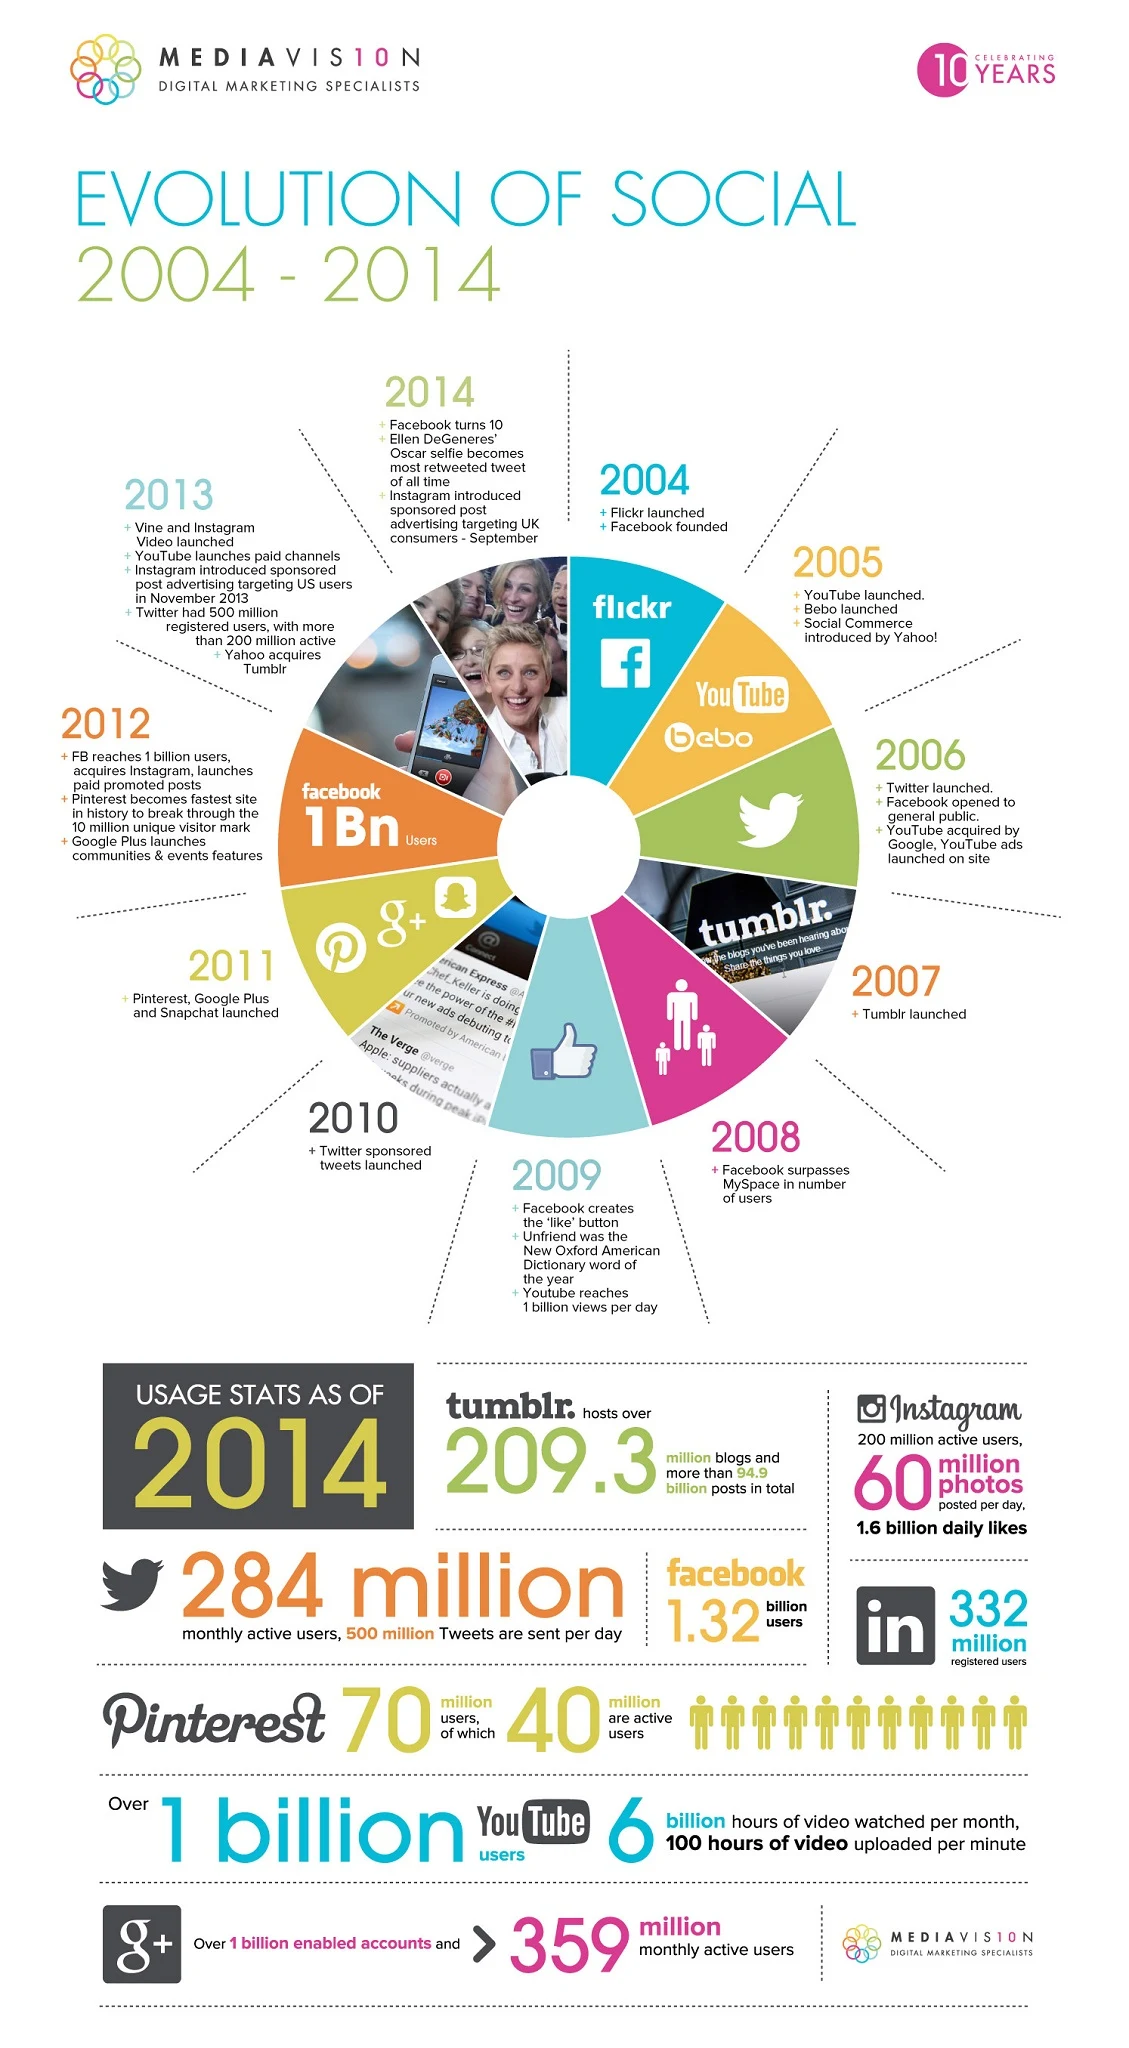 The History of #SocialMedia from 2004 - 2014 - #infographic